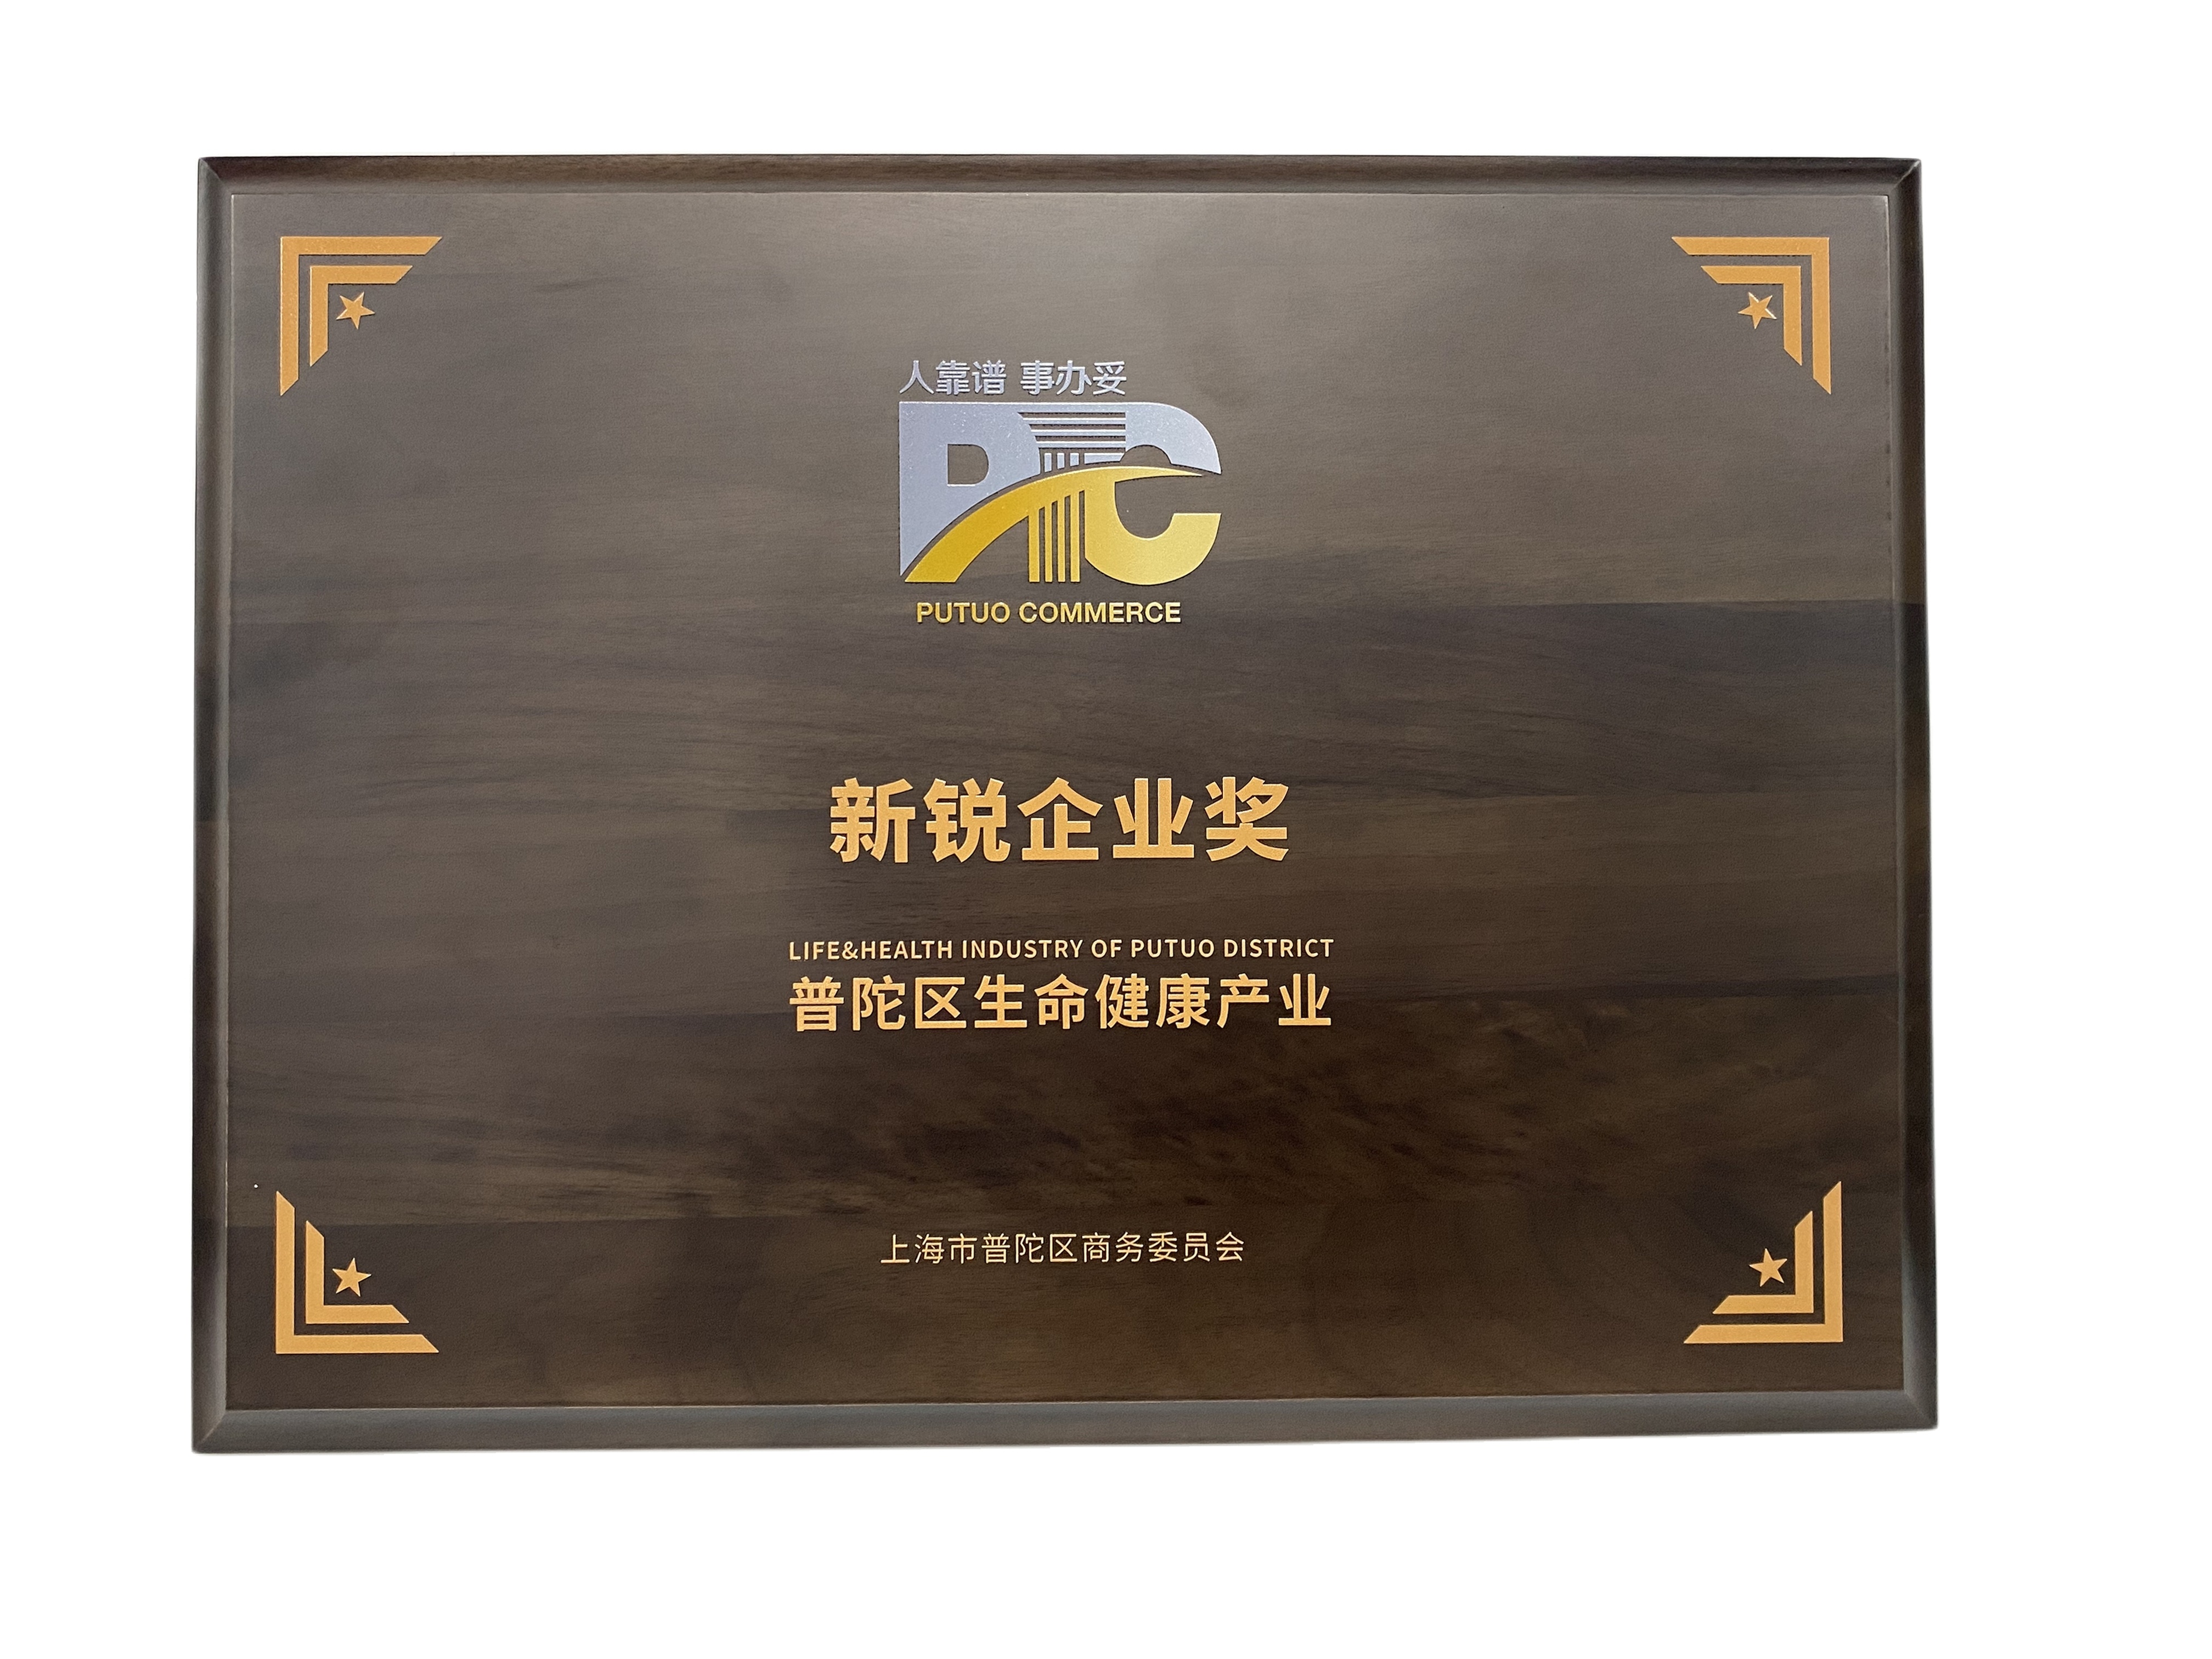 New Enterprise Award - Putuo District Life and Health Industry